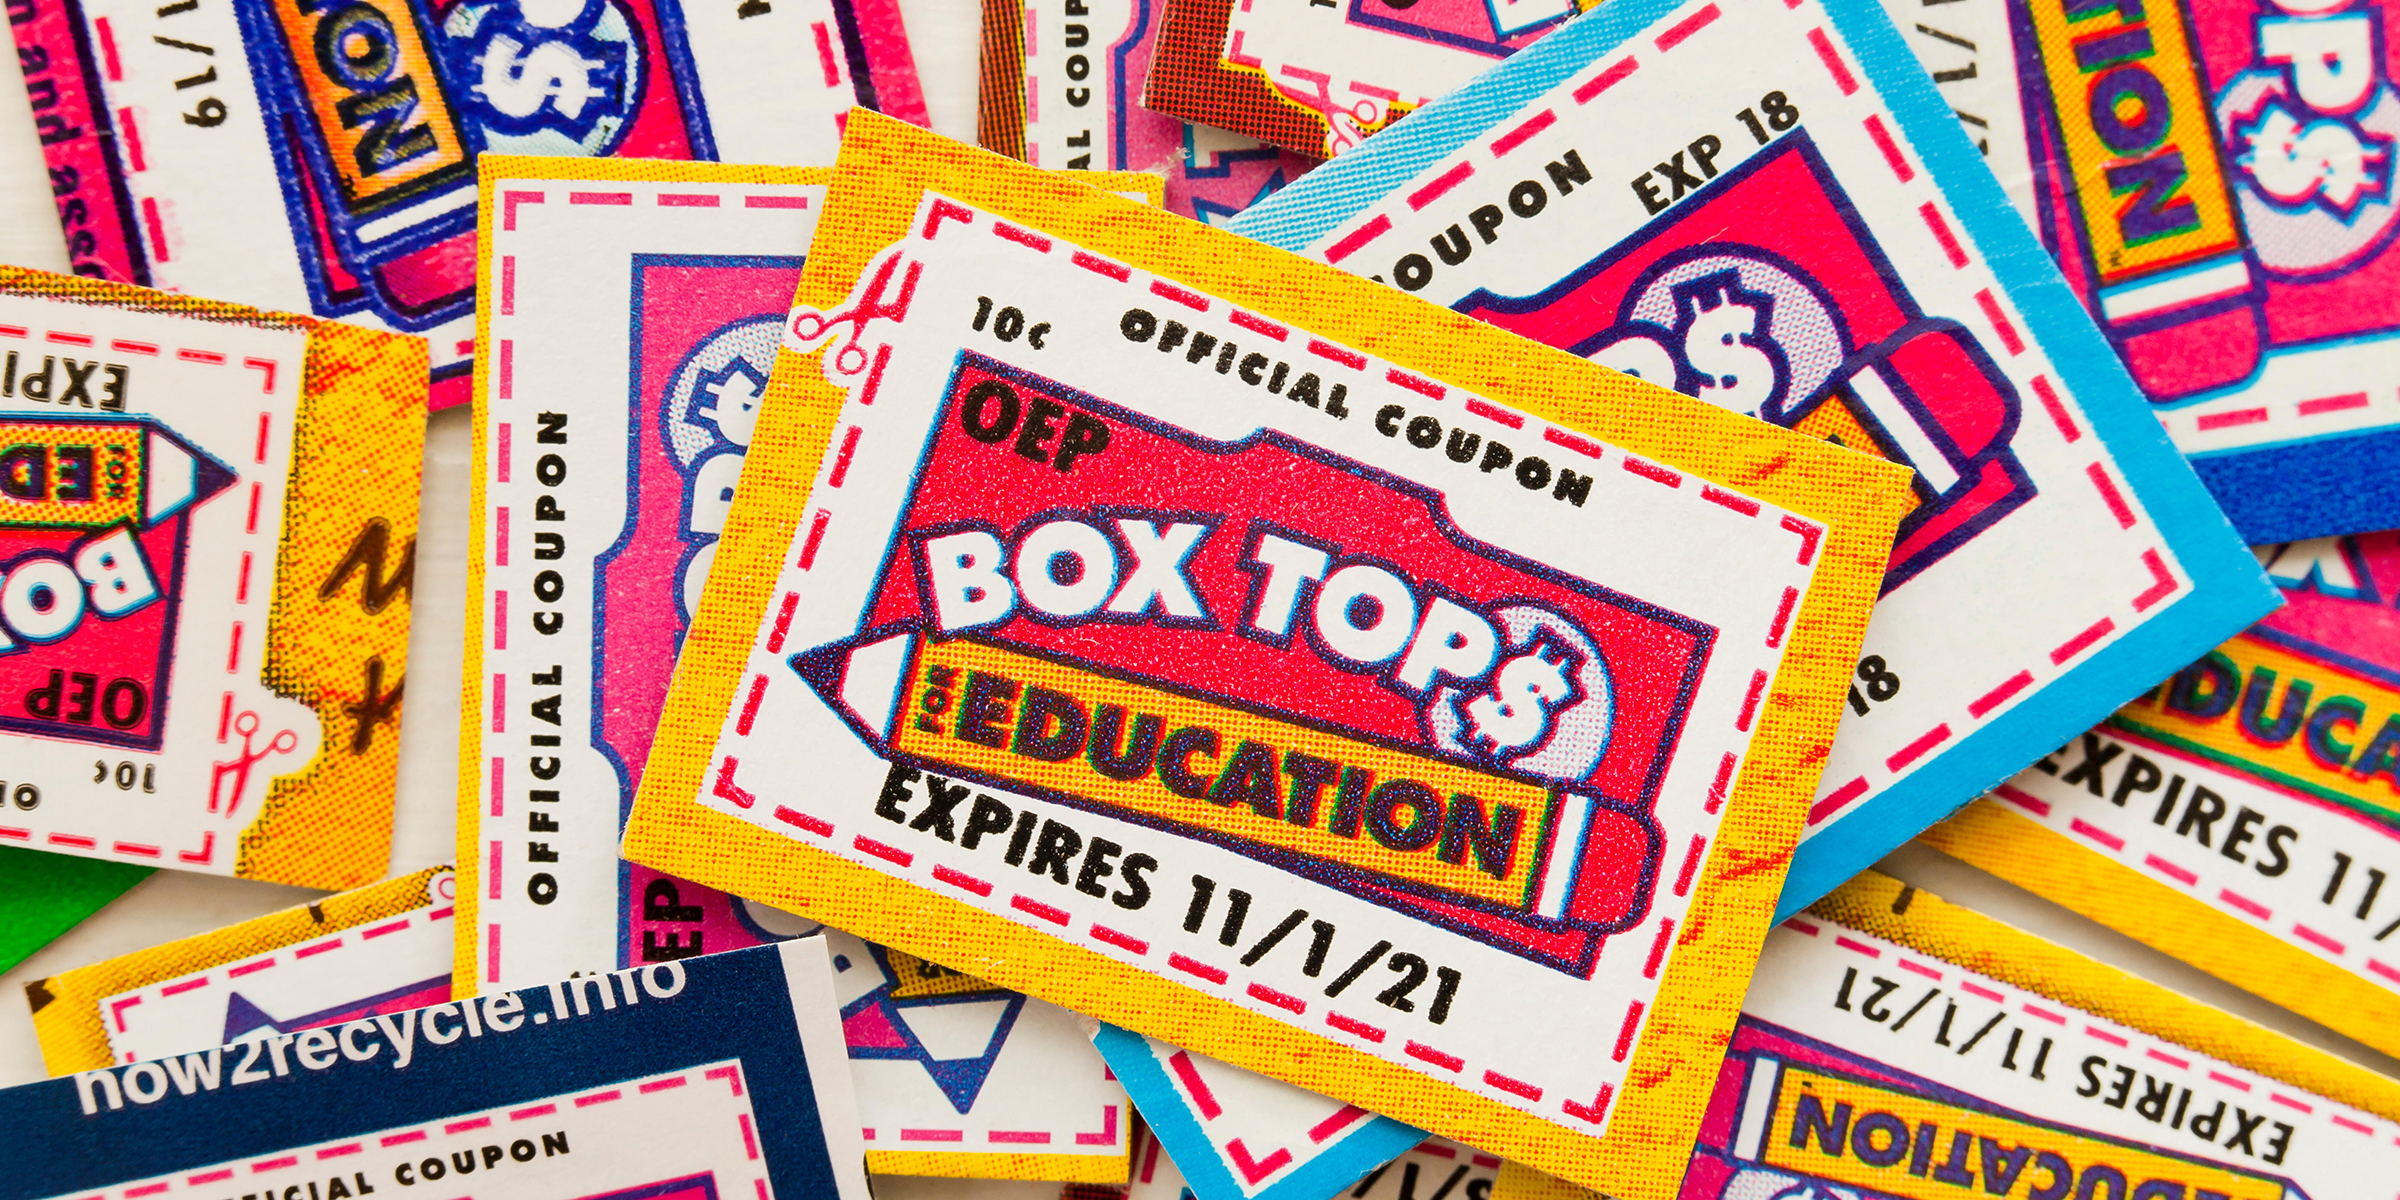 There's a whole new way to collect Box Tops for Education.